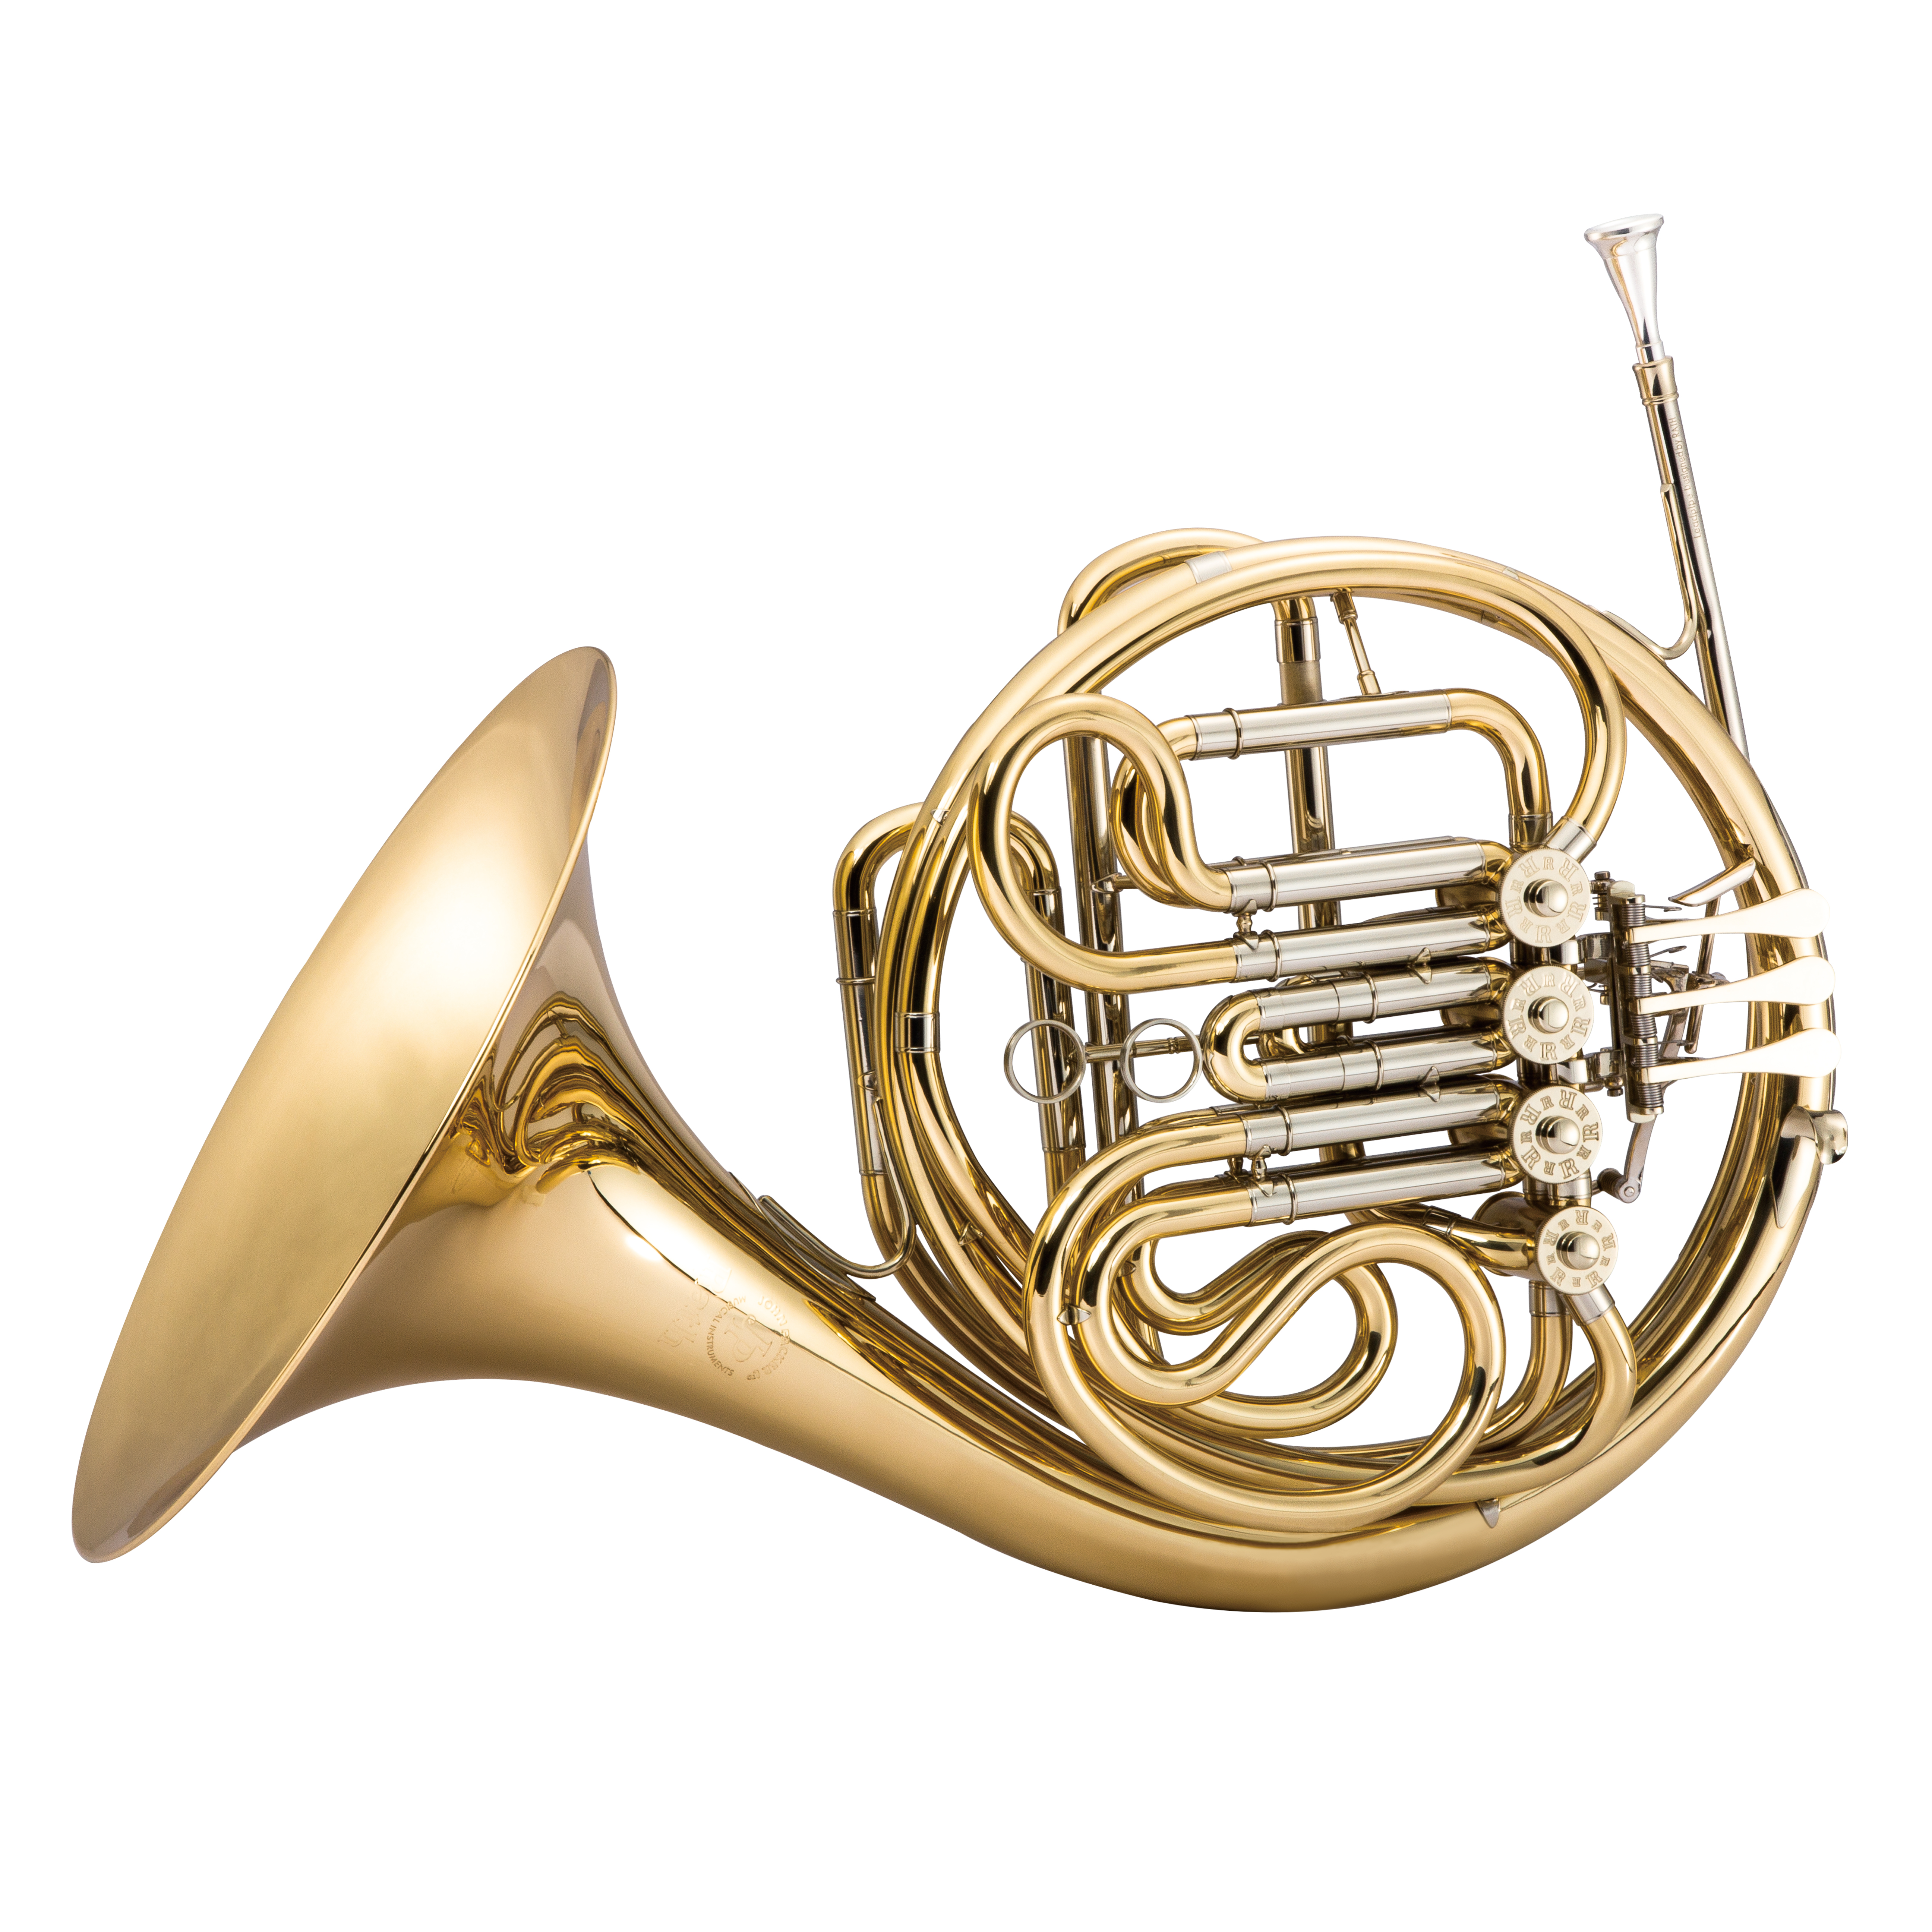 French Horns - TAYLORMADE MUSIC AUSTRALIA